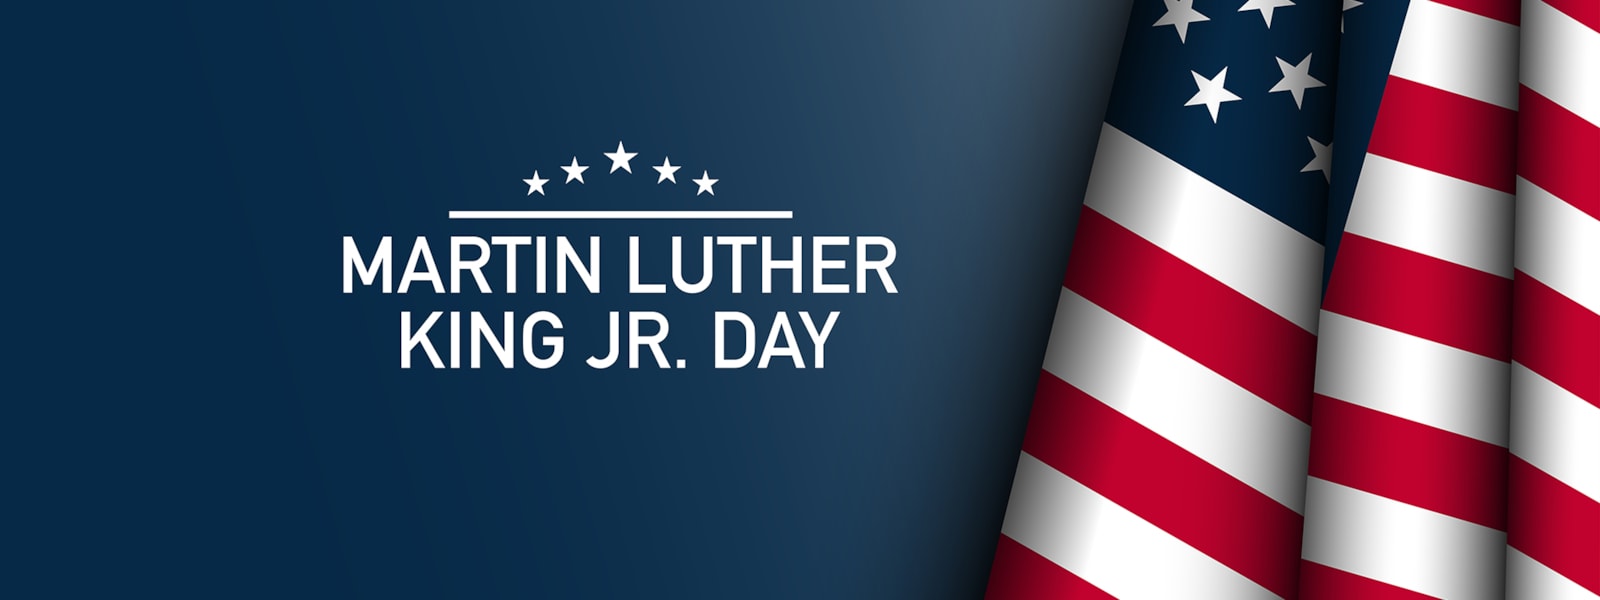 Martin Luther King Jr Day on a blue background and a flag to the right